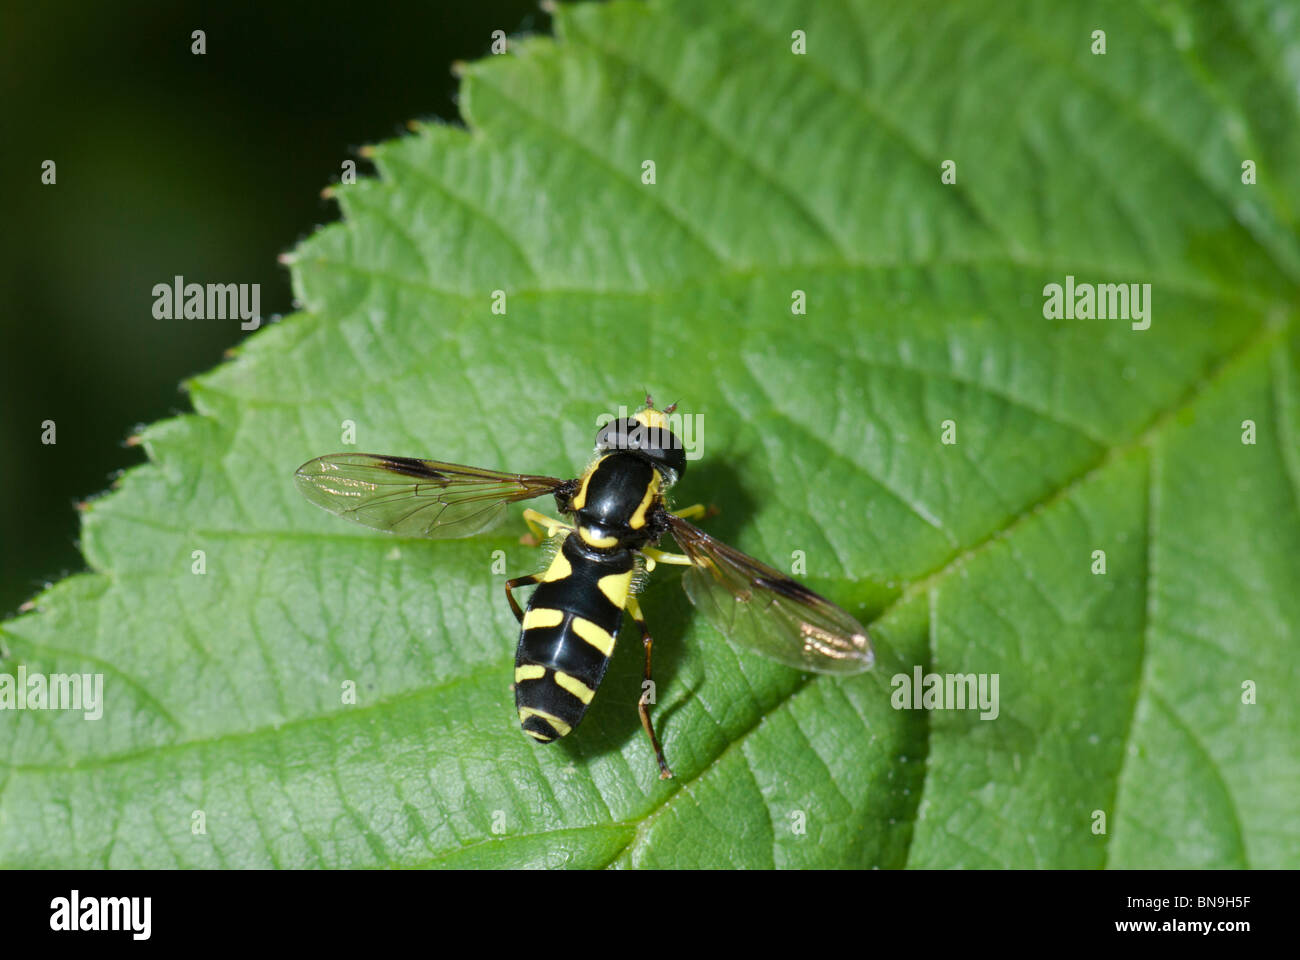 Hoverfly (Xanthogramma pedissequum) on a leaf. Wasp mimic Stock Photo